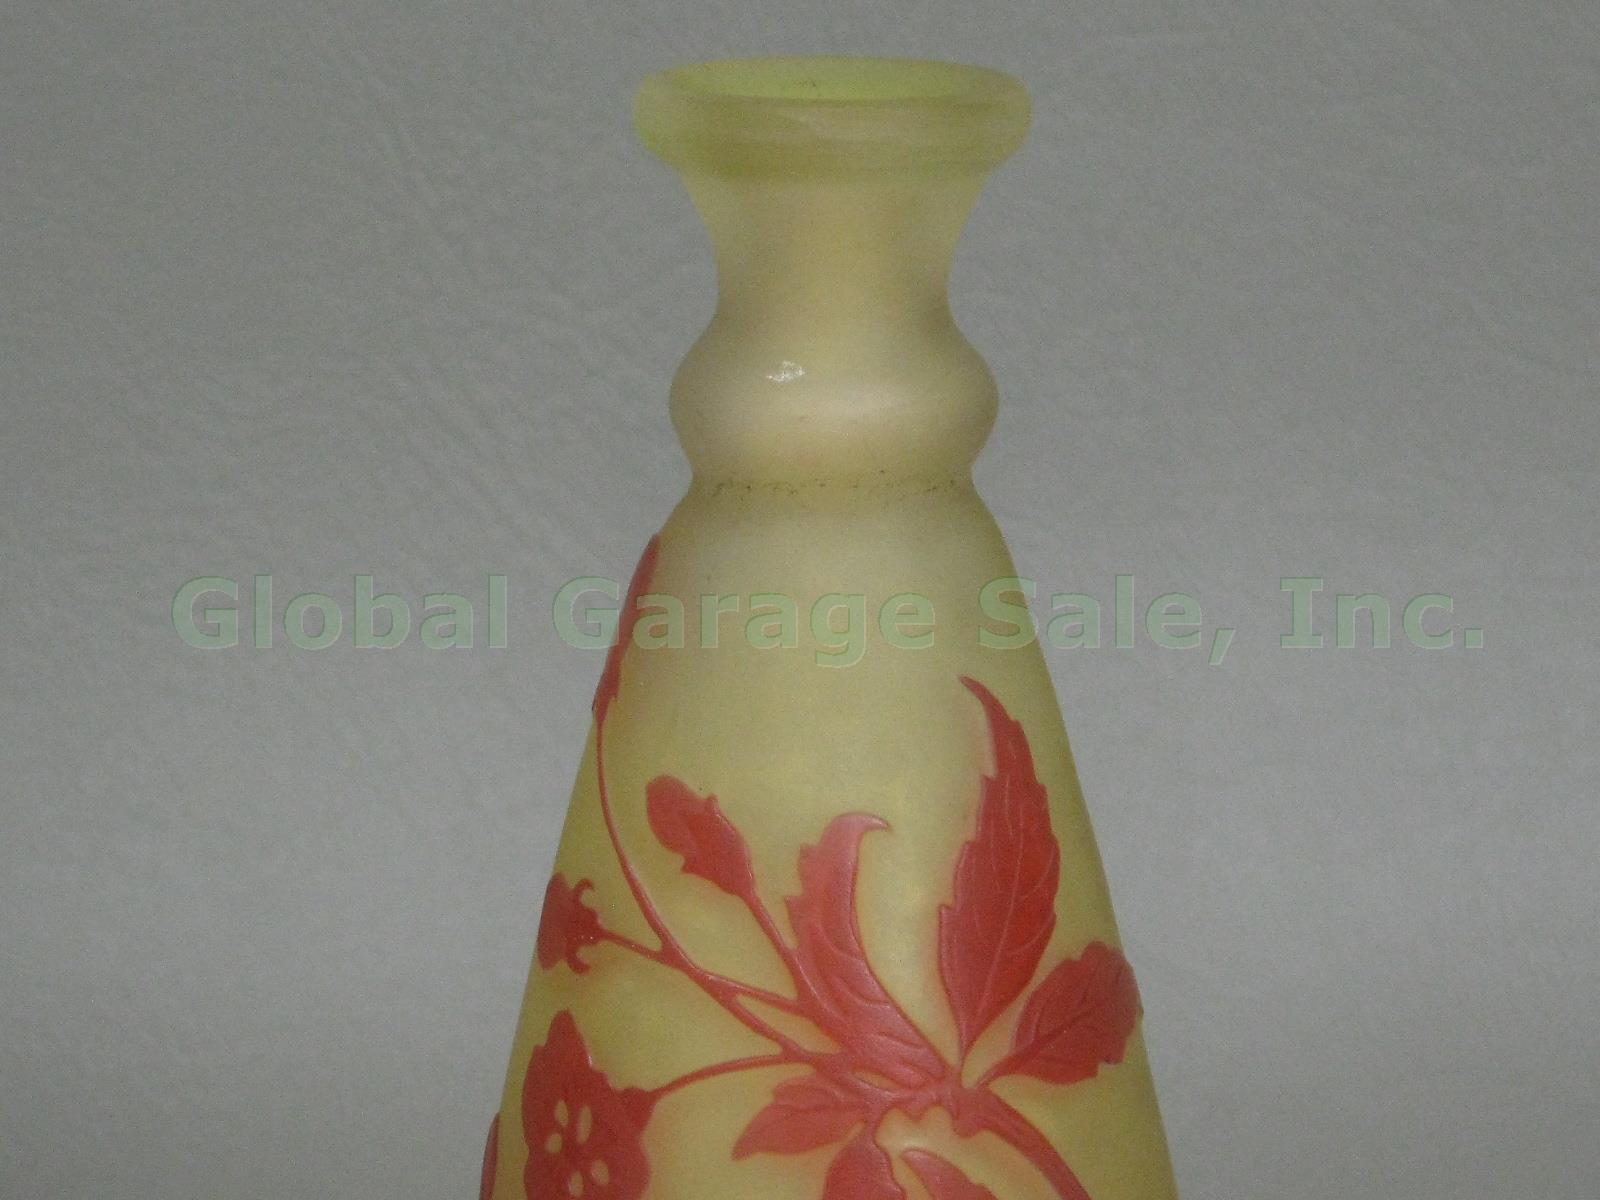 Antique Emile Galle Signed Cameo Art Glass Perfume Bottle Bud Vase Red & Yellow 1